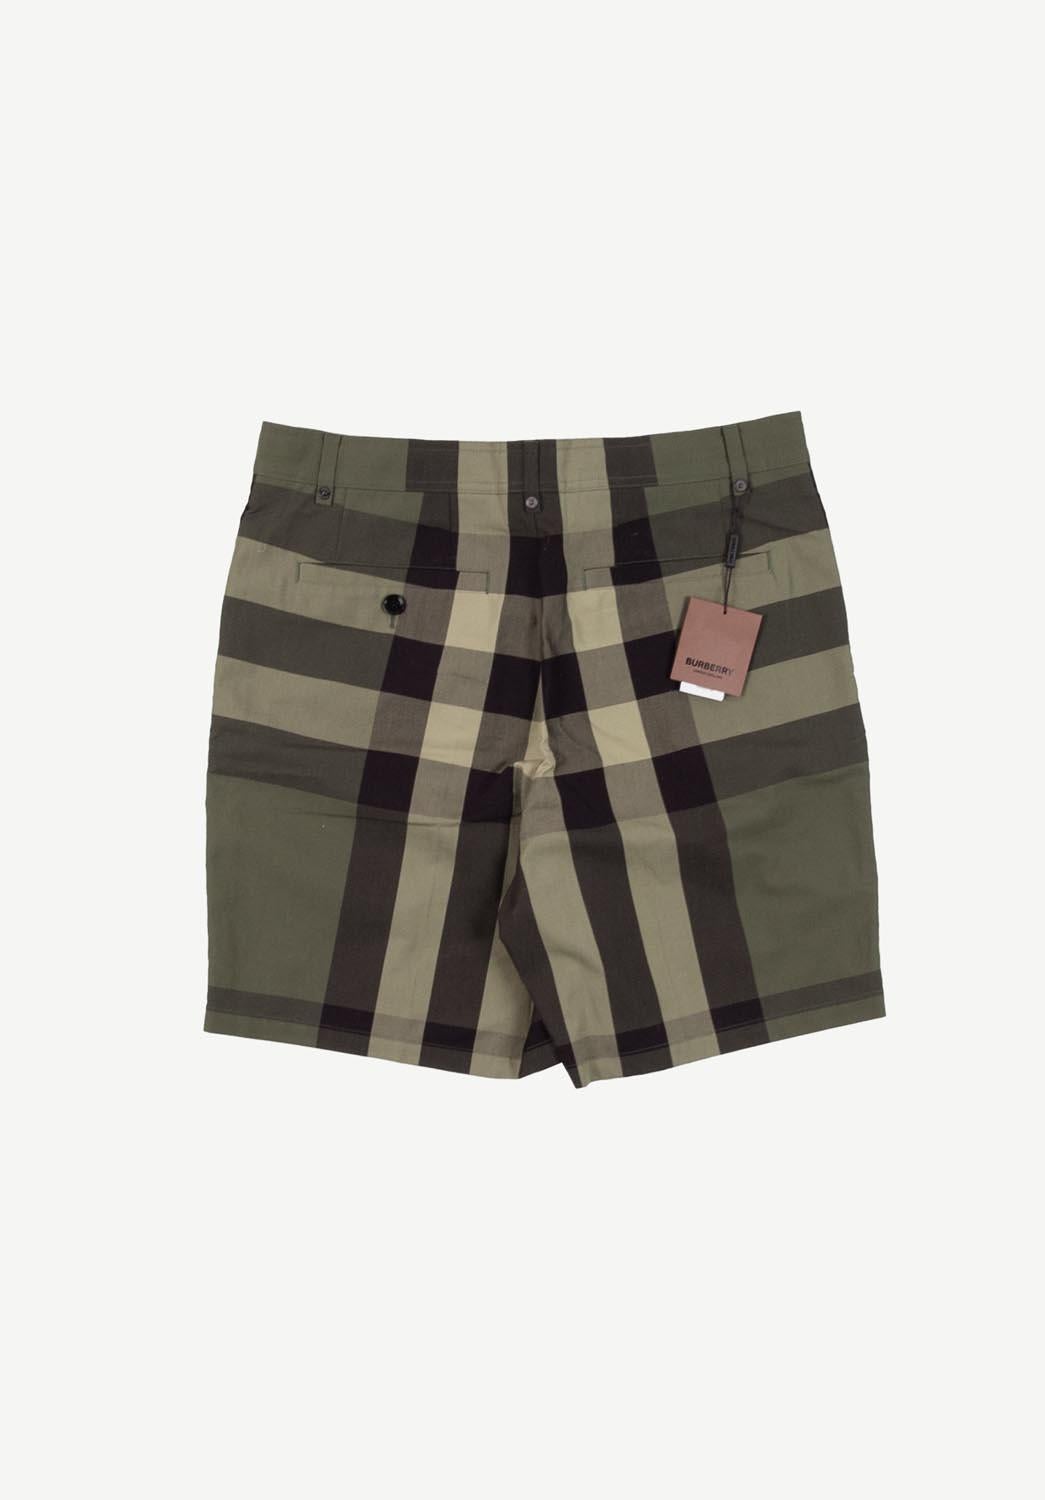 Item for sale is 100% genuine Burberry Men Shorts, S322
Color: multi
(An actual color may a bit vary due to individual computer screen interpretation)
Material: 100% cotton
Tag size: 52 (Large)
These shorts are great quality item. Rate 10 of 10,